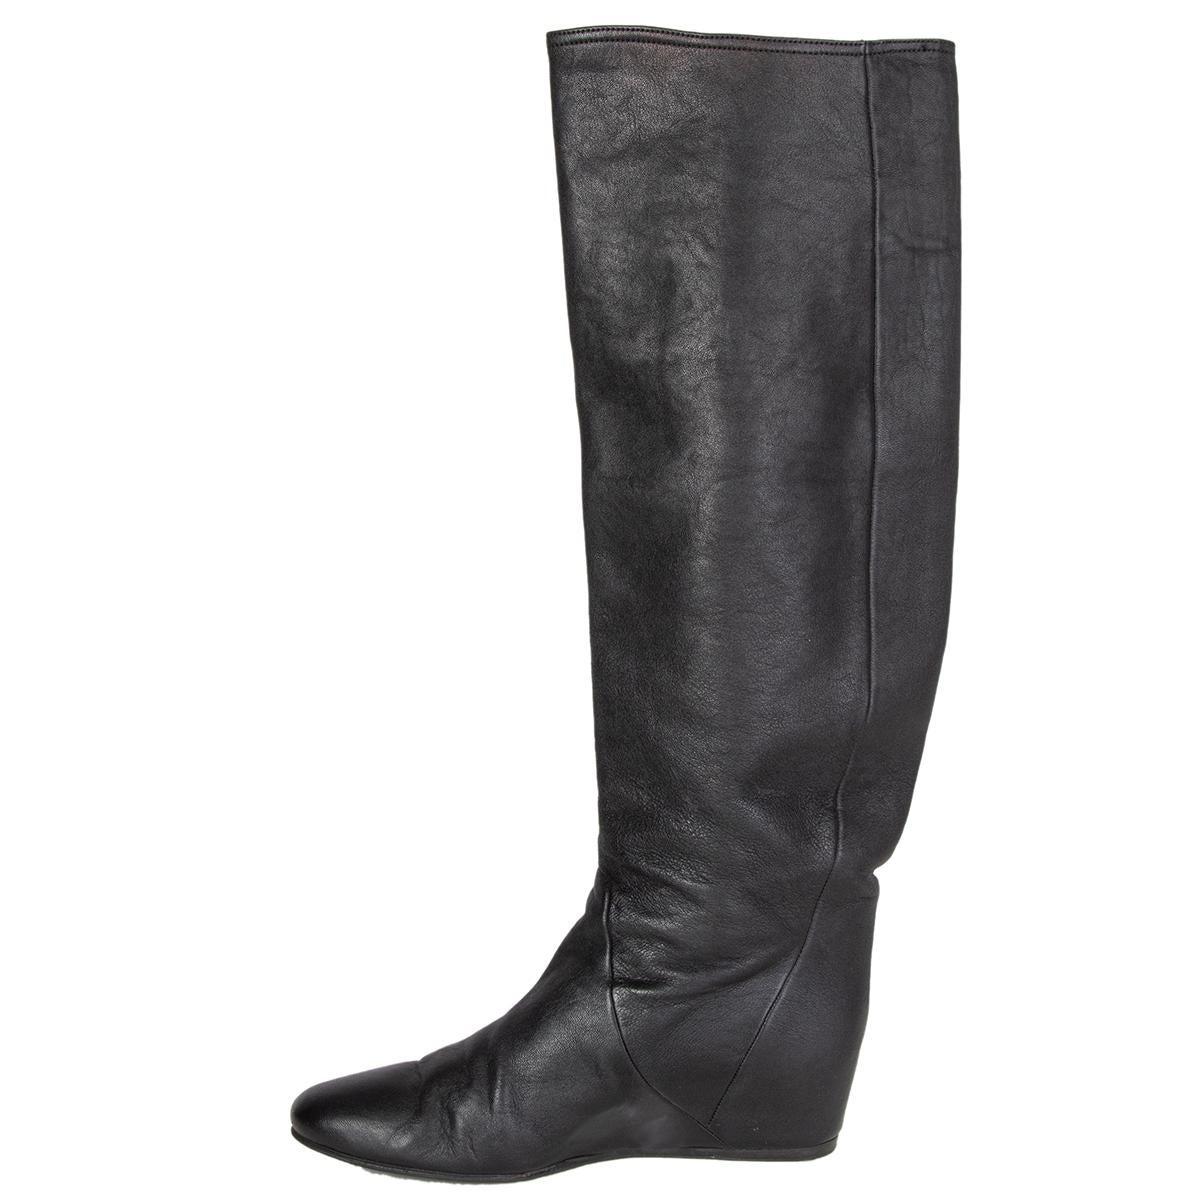 lanvin wedge boots